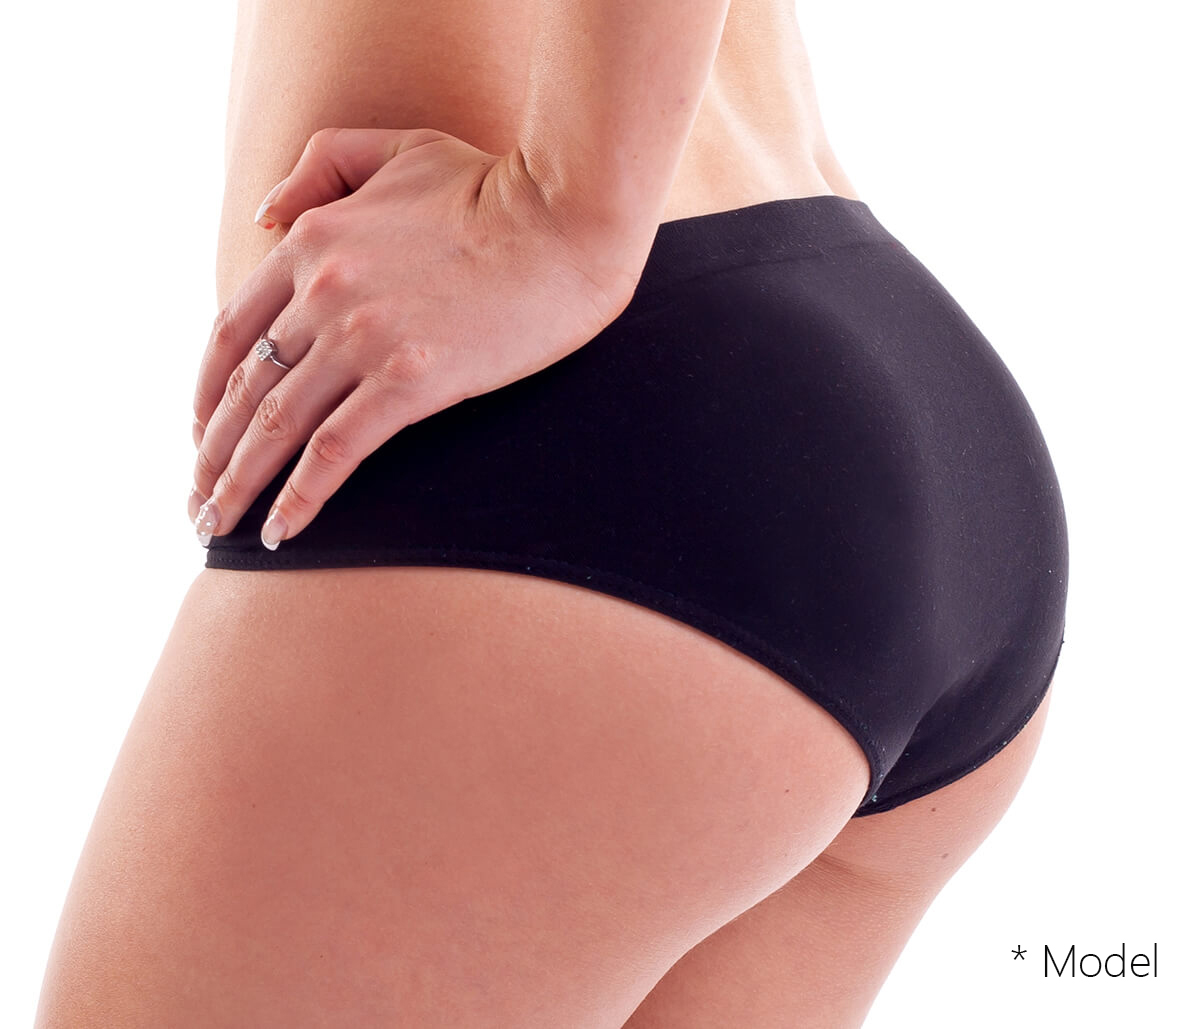 Professional Buttock Augmentation Procedures in Beverly Hills, CA Area